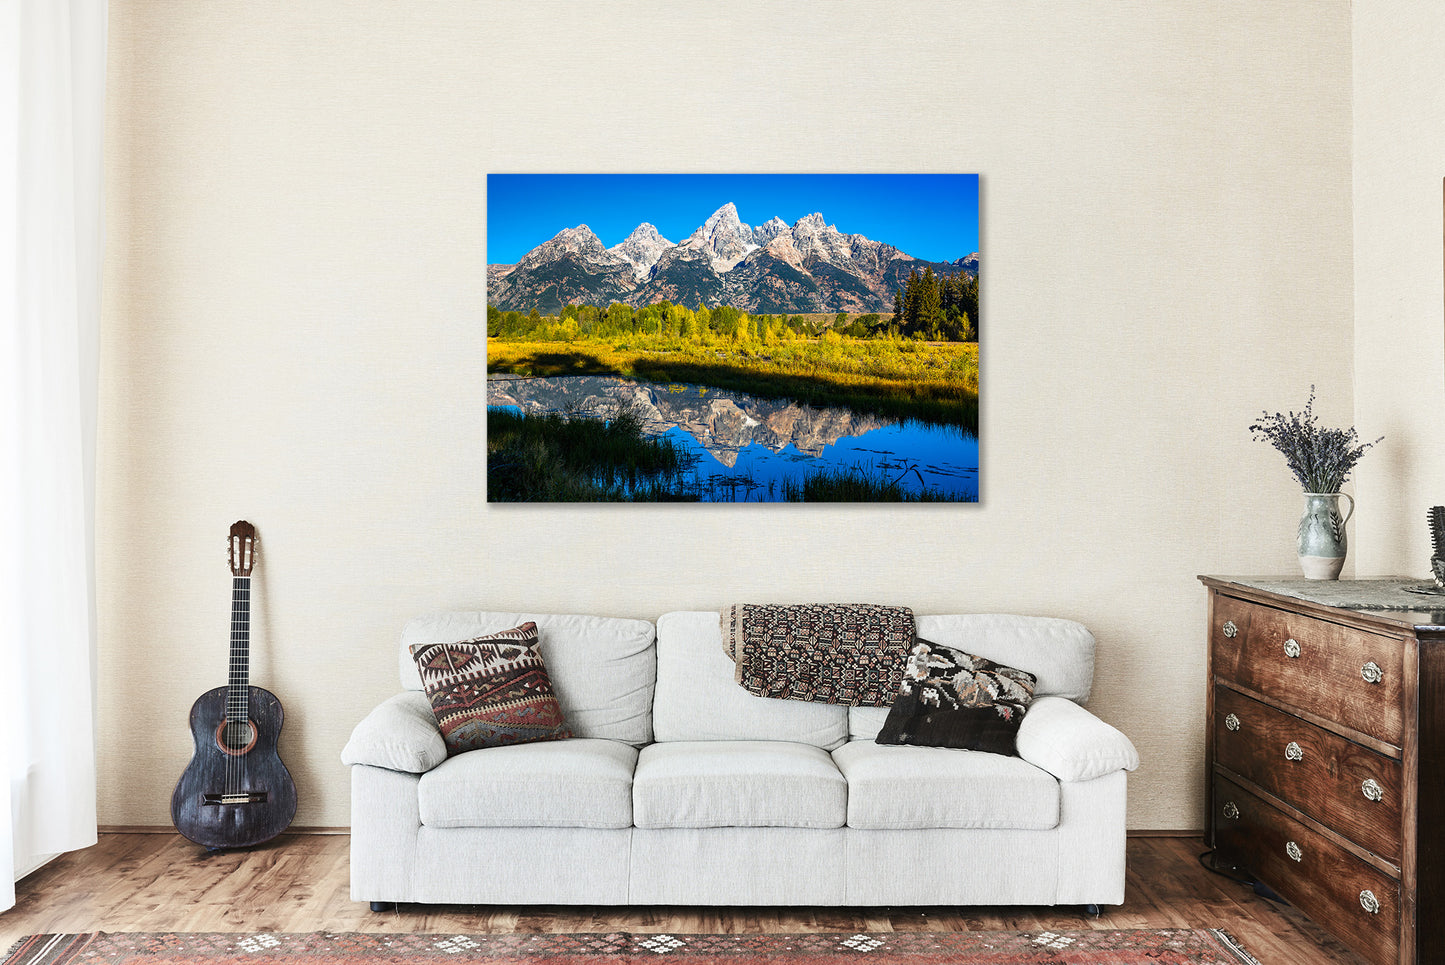 Western Metal Print - Grand Tetons Reflecting Off Water at Schwabacher Landing in Wyoming - Rocky Mountain Wall Art National Park Decor